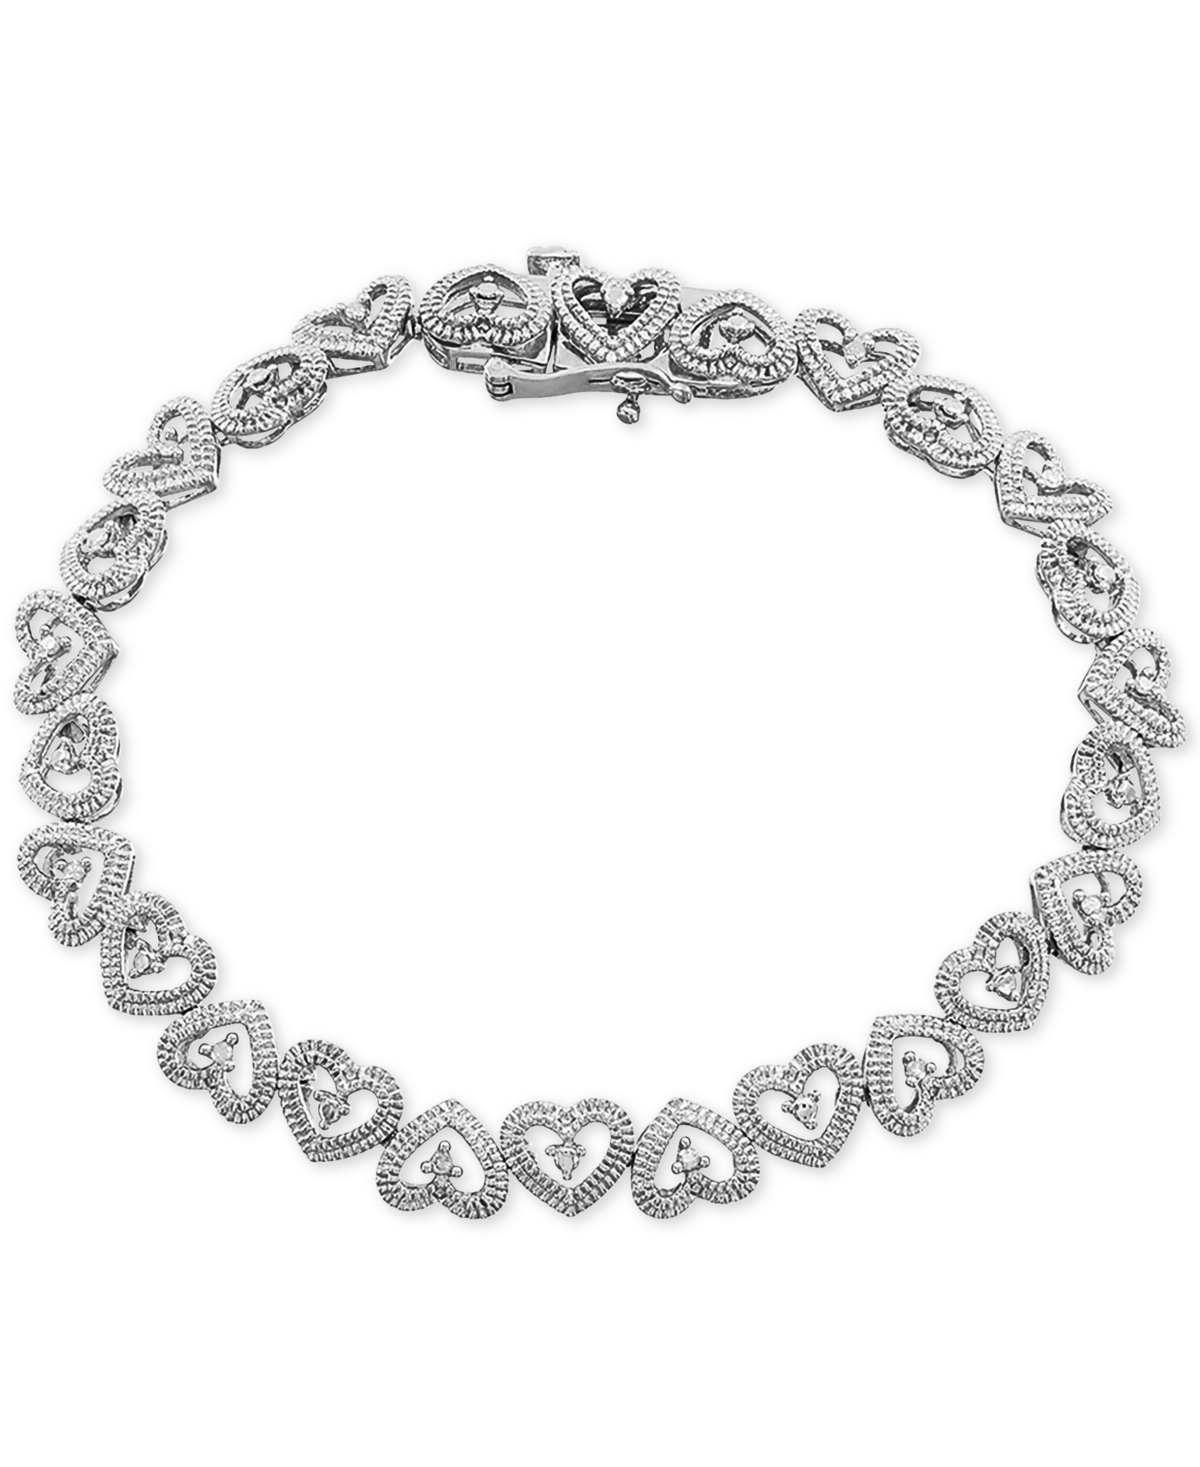 MACY'S DIAMOND HEART LINK BRACELET (1/10 CT. T.W.) AVAILABLE IN STERLING SILVER OR 18K GOLD-PLATED STERLING